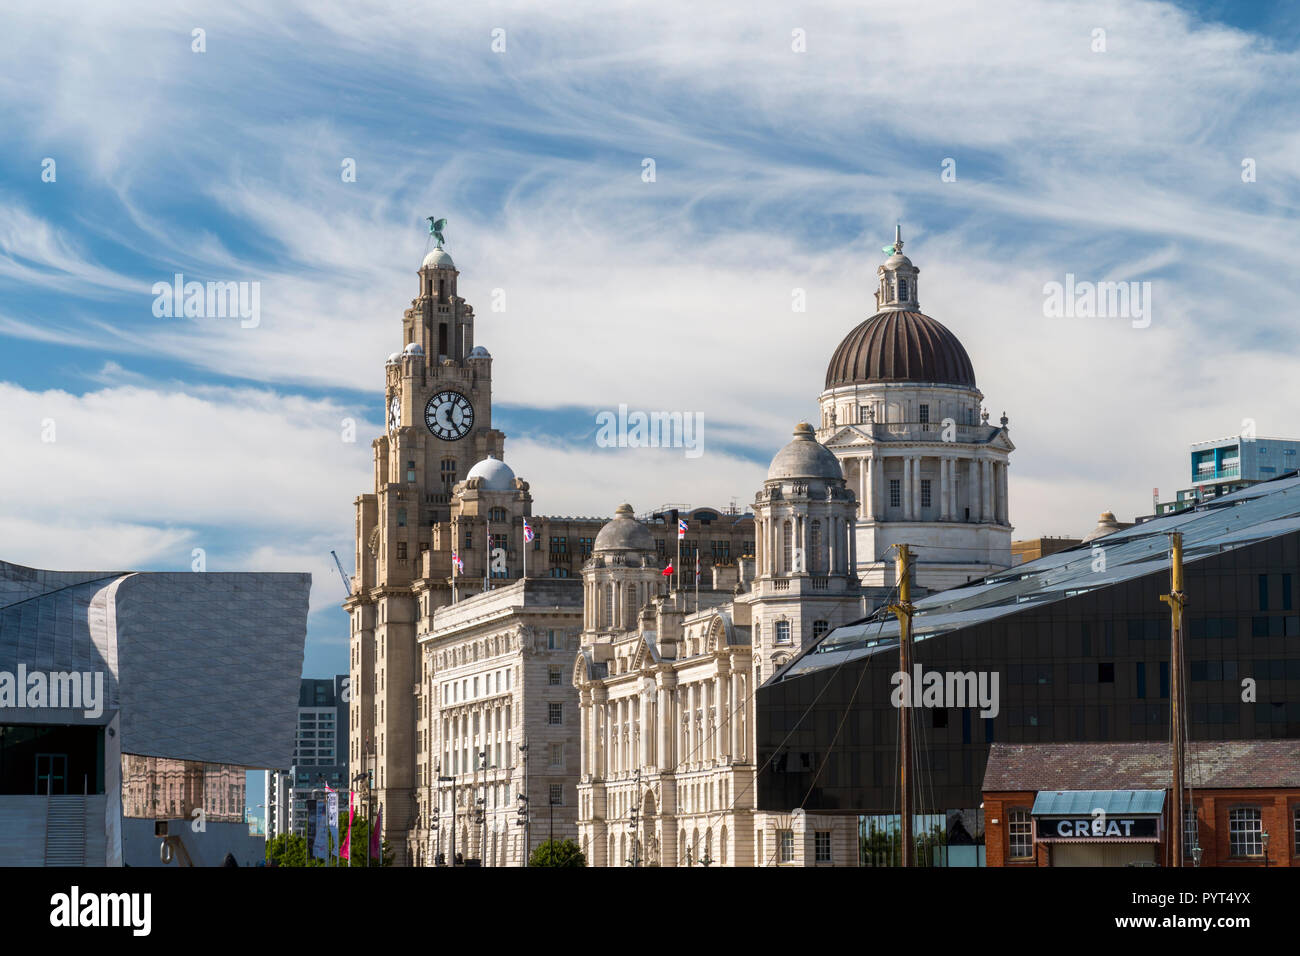 The Three Graces - The Port of Liverpool Building, Cunard Building and Royal Liver Buidling, on Pier Head near the River Mersey of Liverpool, England Stock Photo